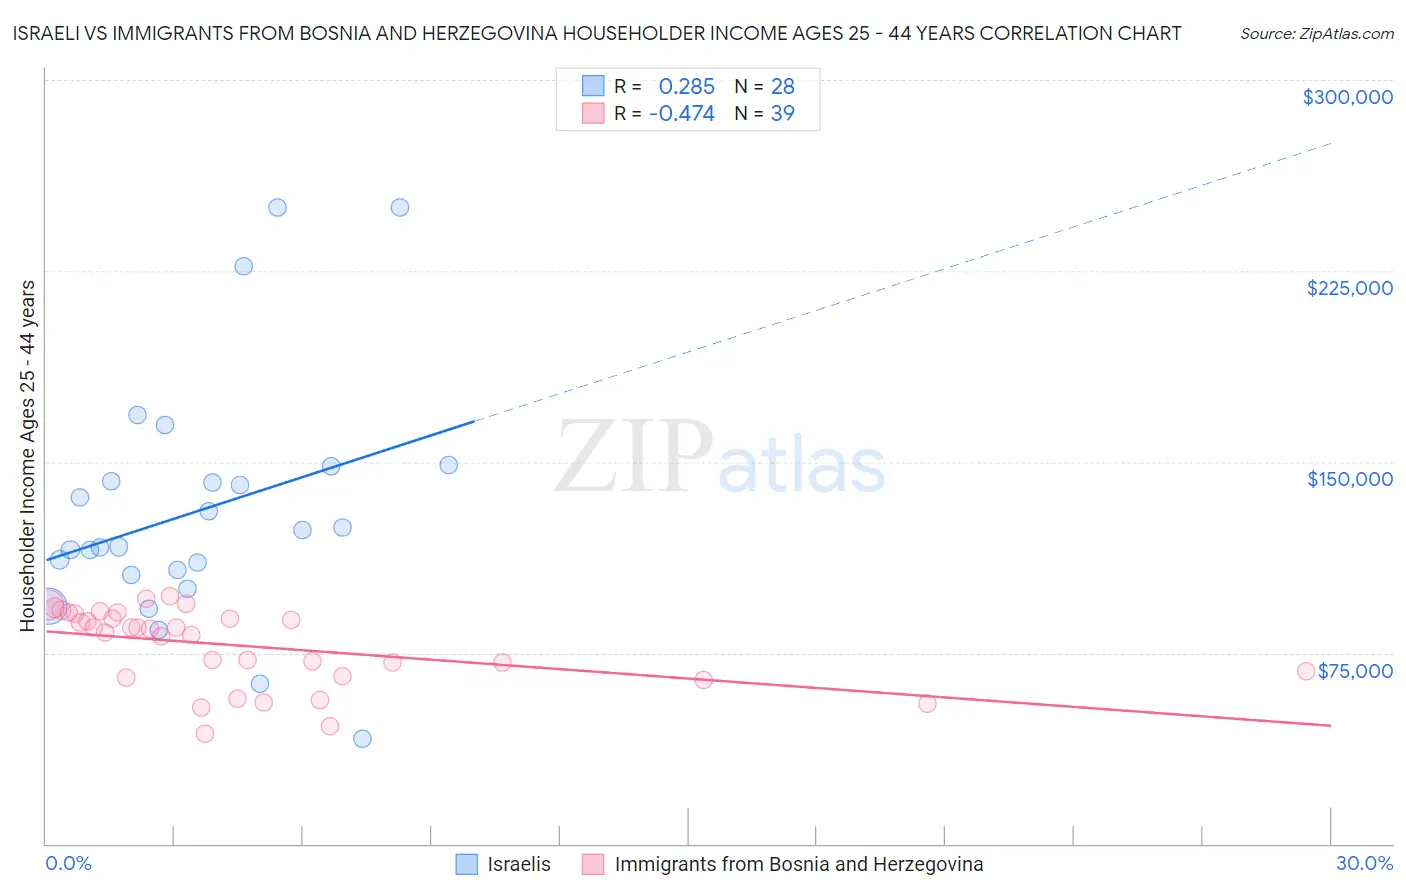 Israeli vs Immigrants from Bosnia and Herzegovina Householder Income Ages 25 - 44 years